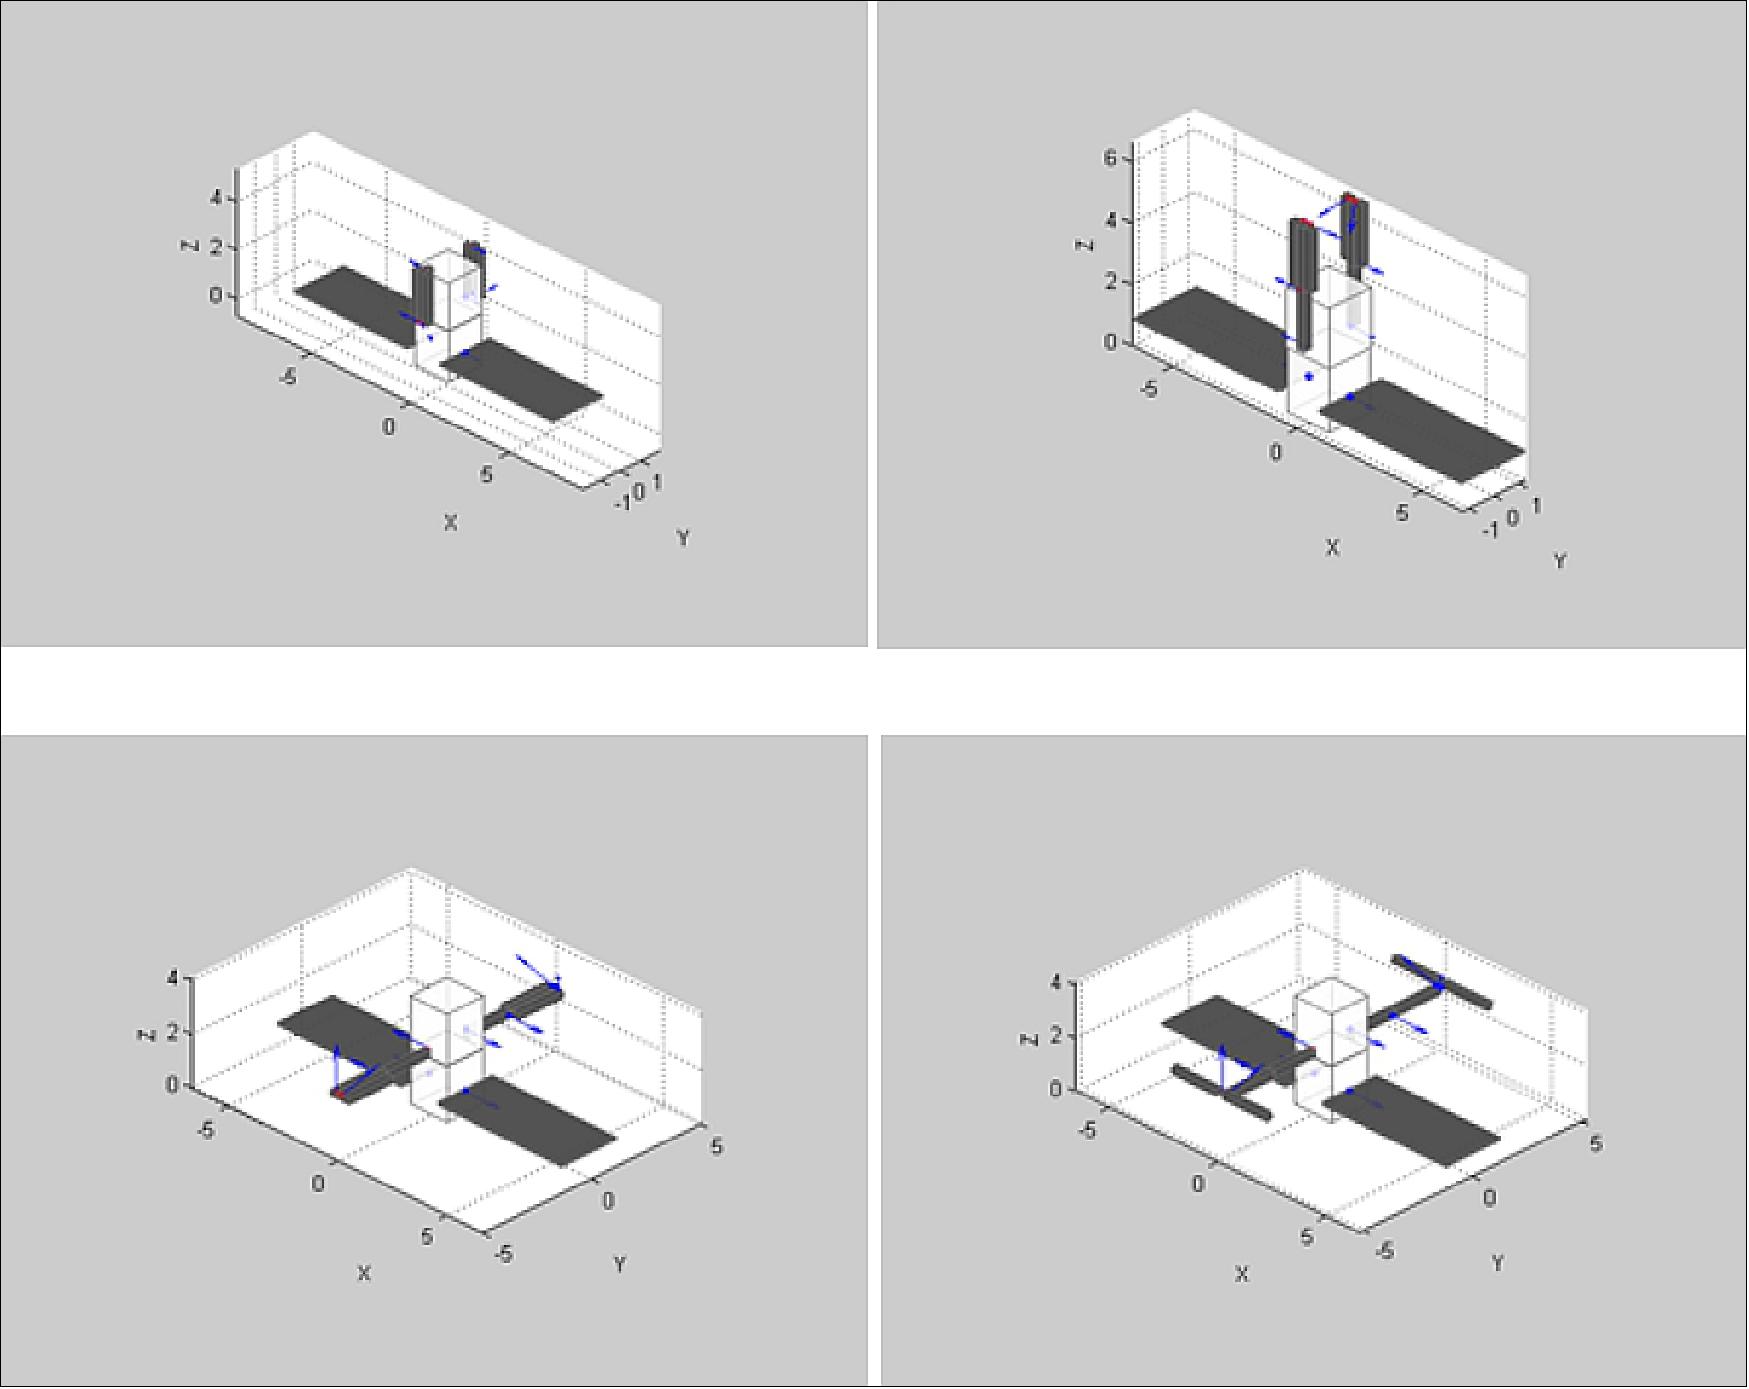 Figure 29: Deployment sequence in 3 steps (image credit: TAS, CNES)